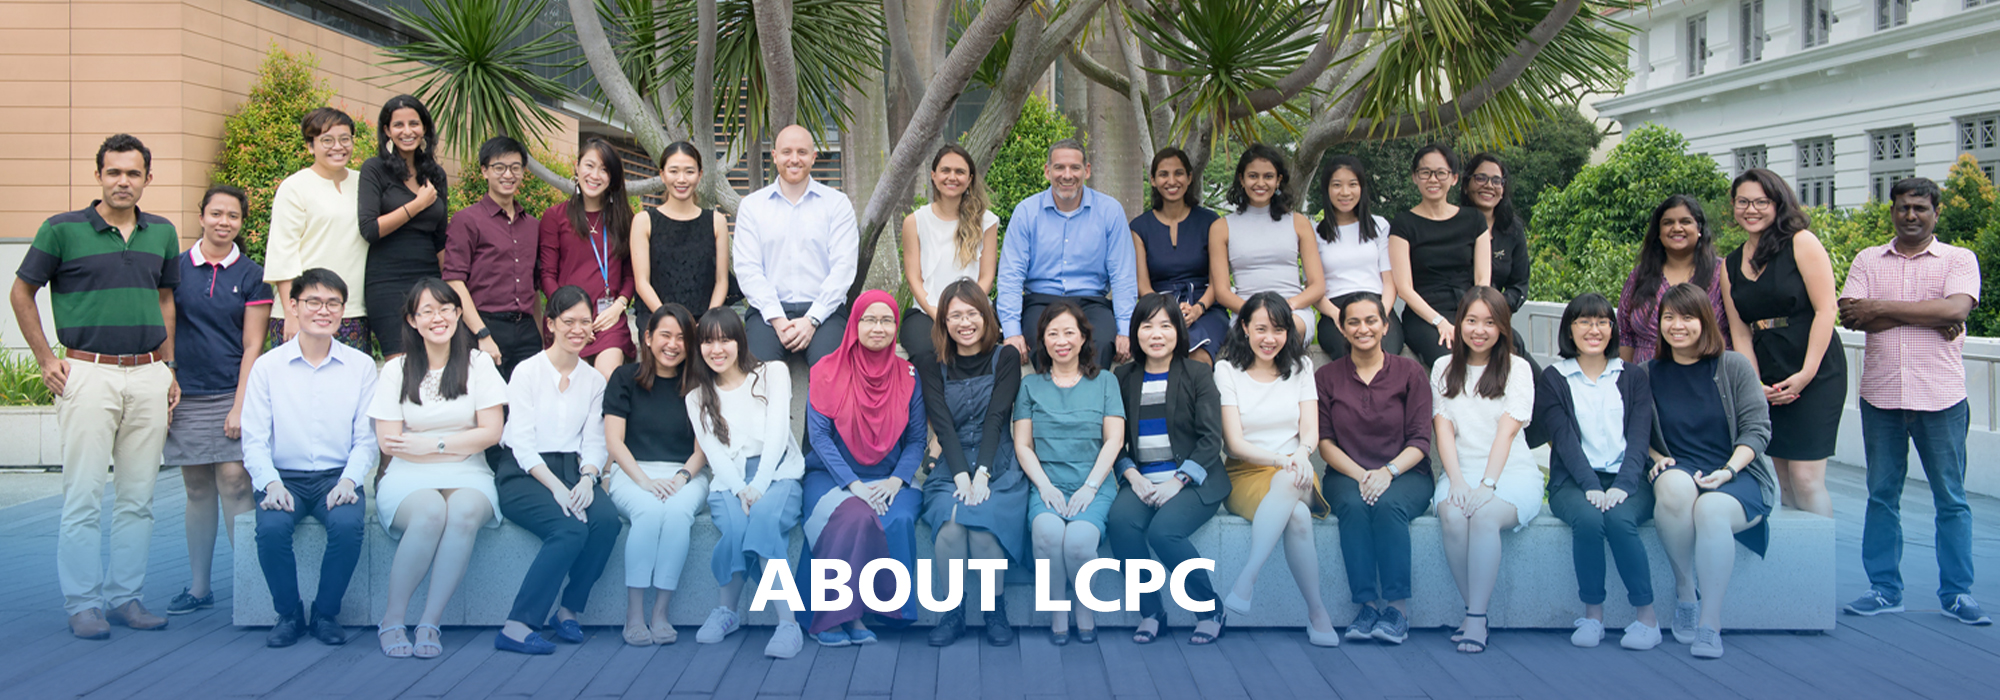 About LCPC Main Banner